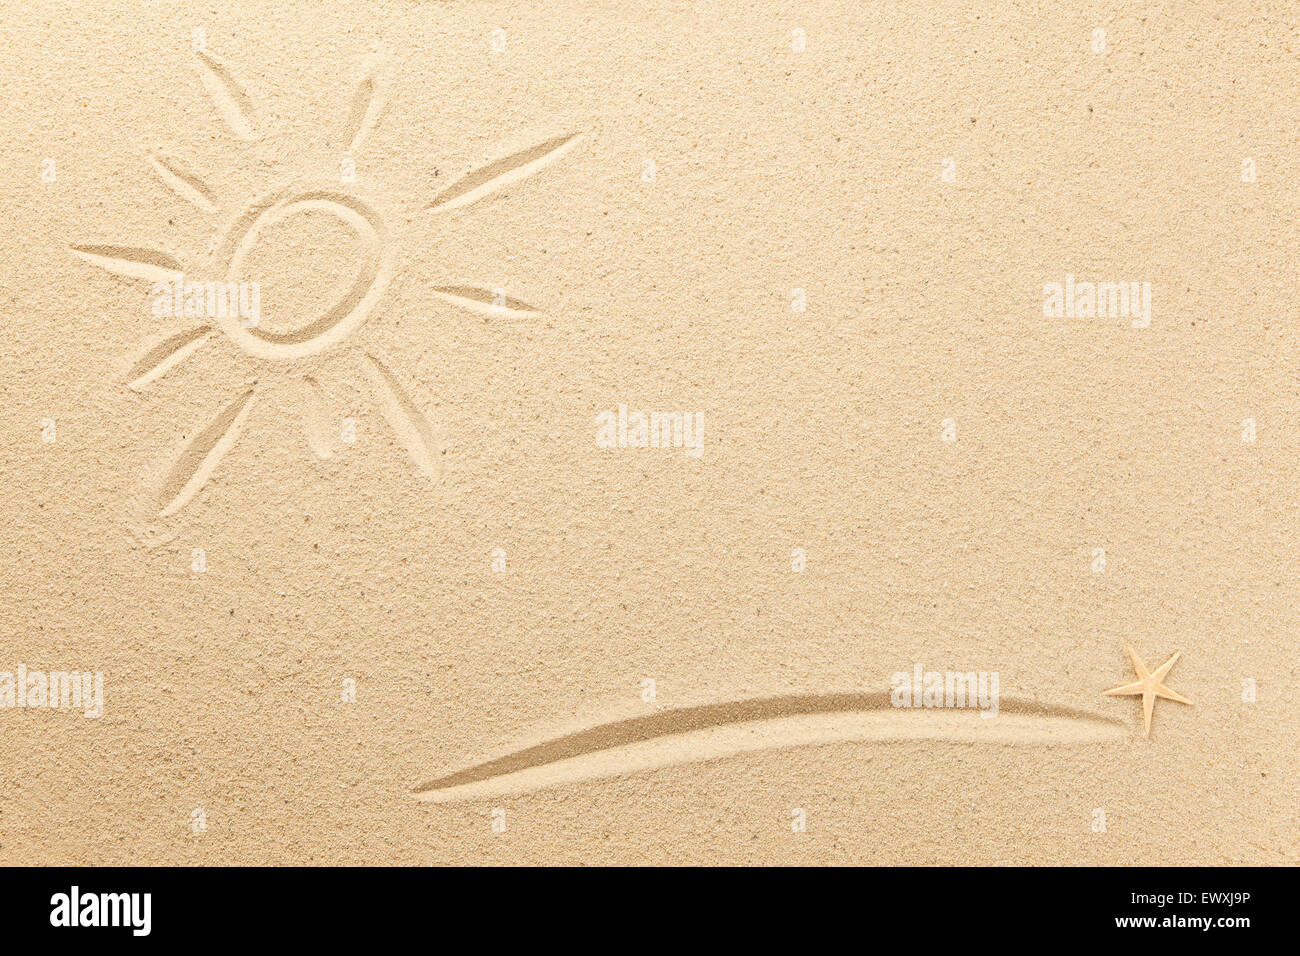 Drawn sun and underline in the sand Stock Photo